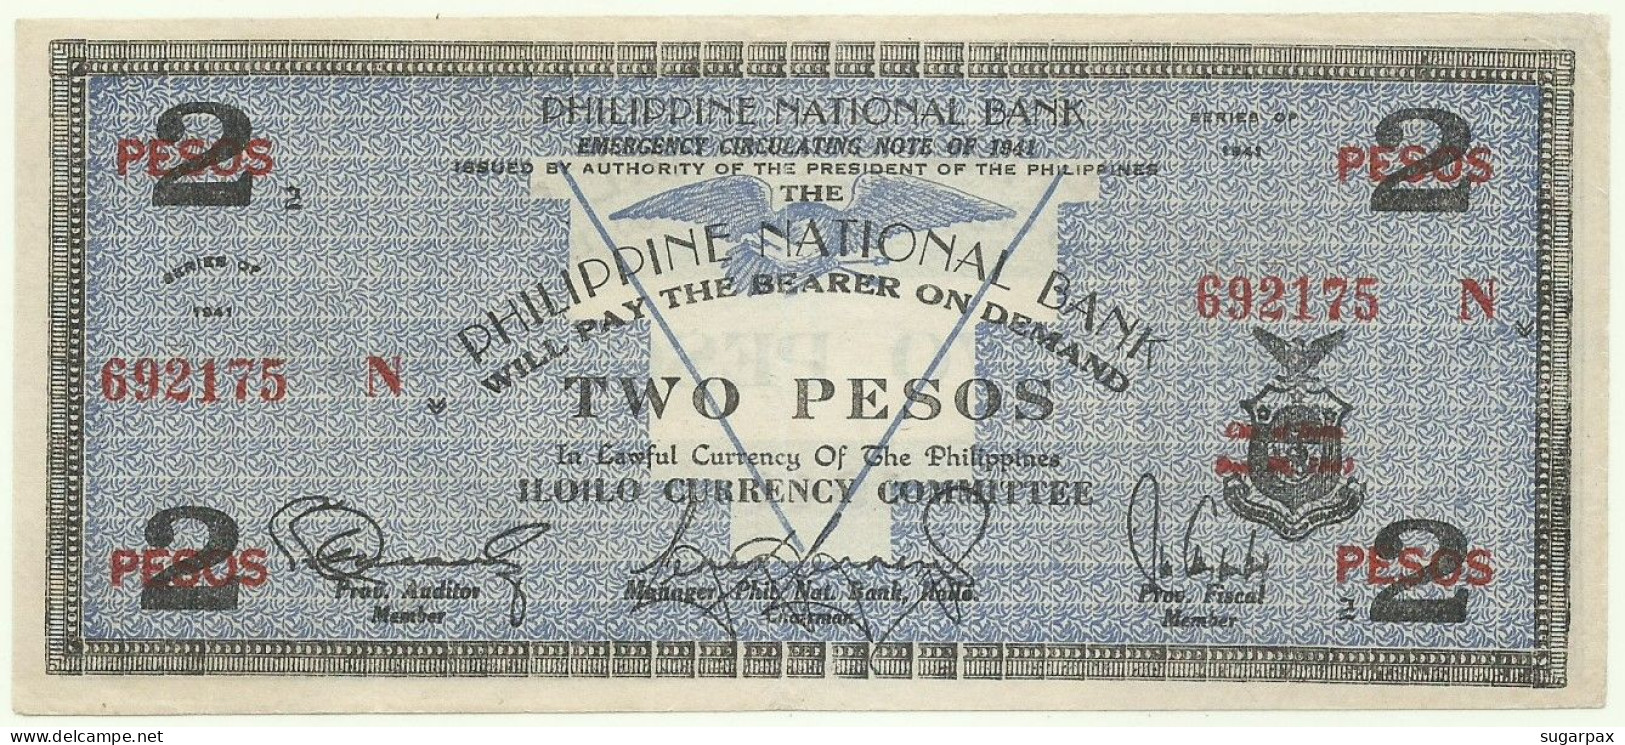 PHILIPPINES - 2 Pesos - 1941 - Pick S 306 - Serie N - ILOILO Currency Committee - Philippinen